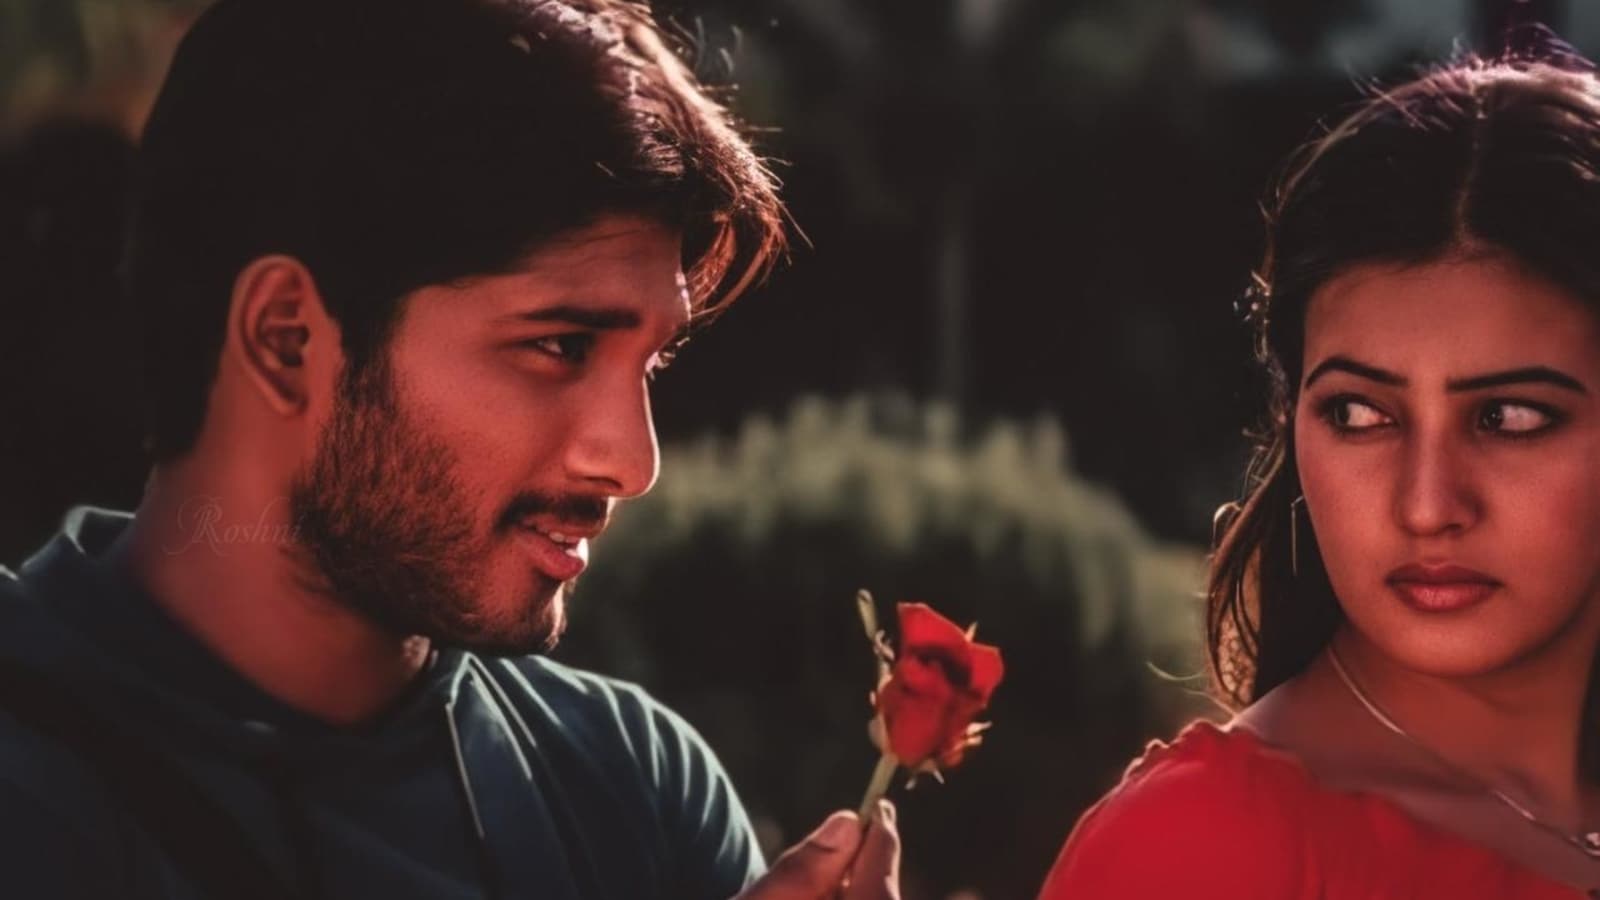 Allu Arjun pens heartfelt post as his film Arya completes 17 years: 'It changed my course as an actor'